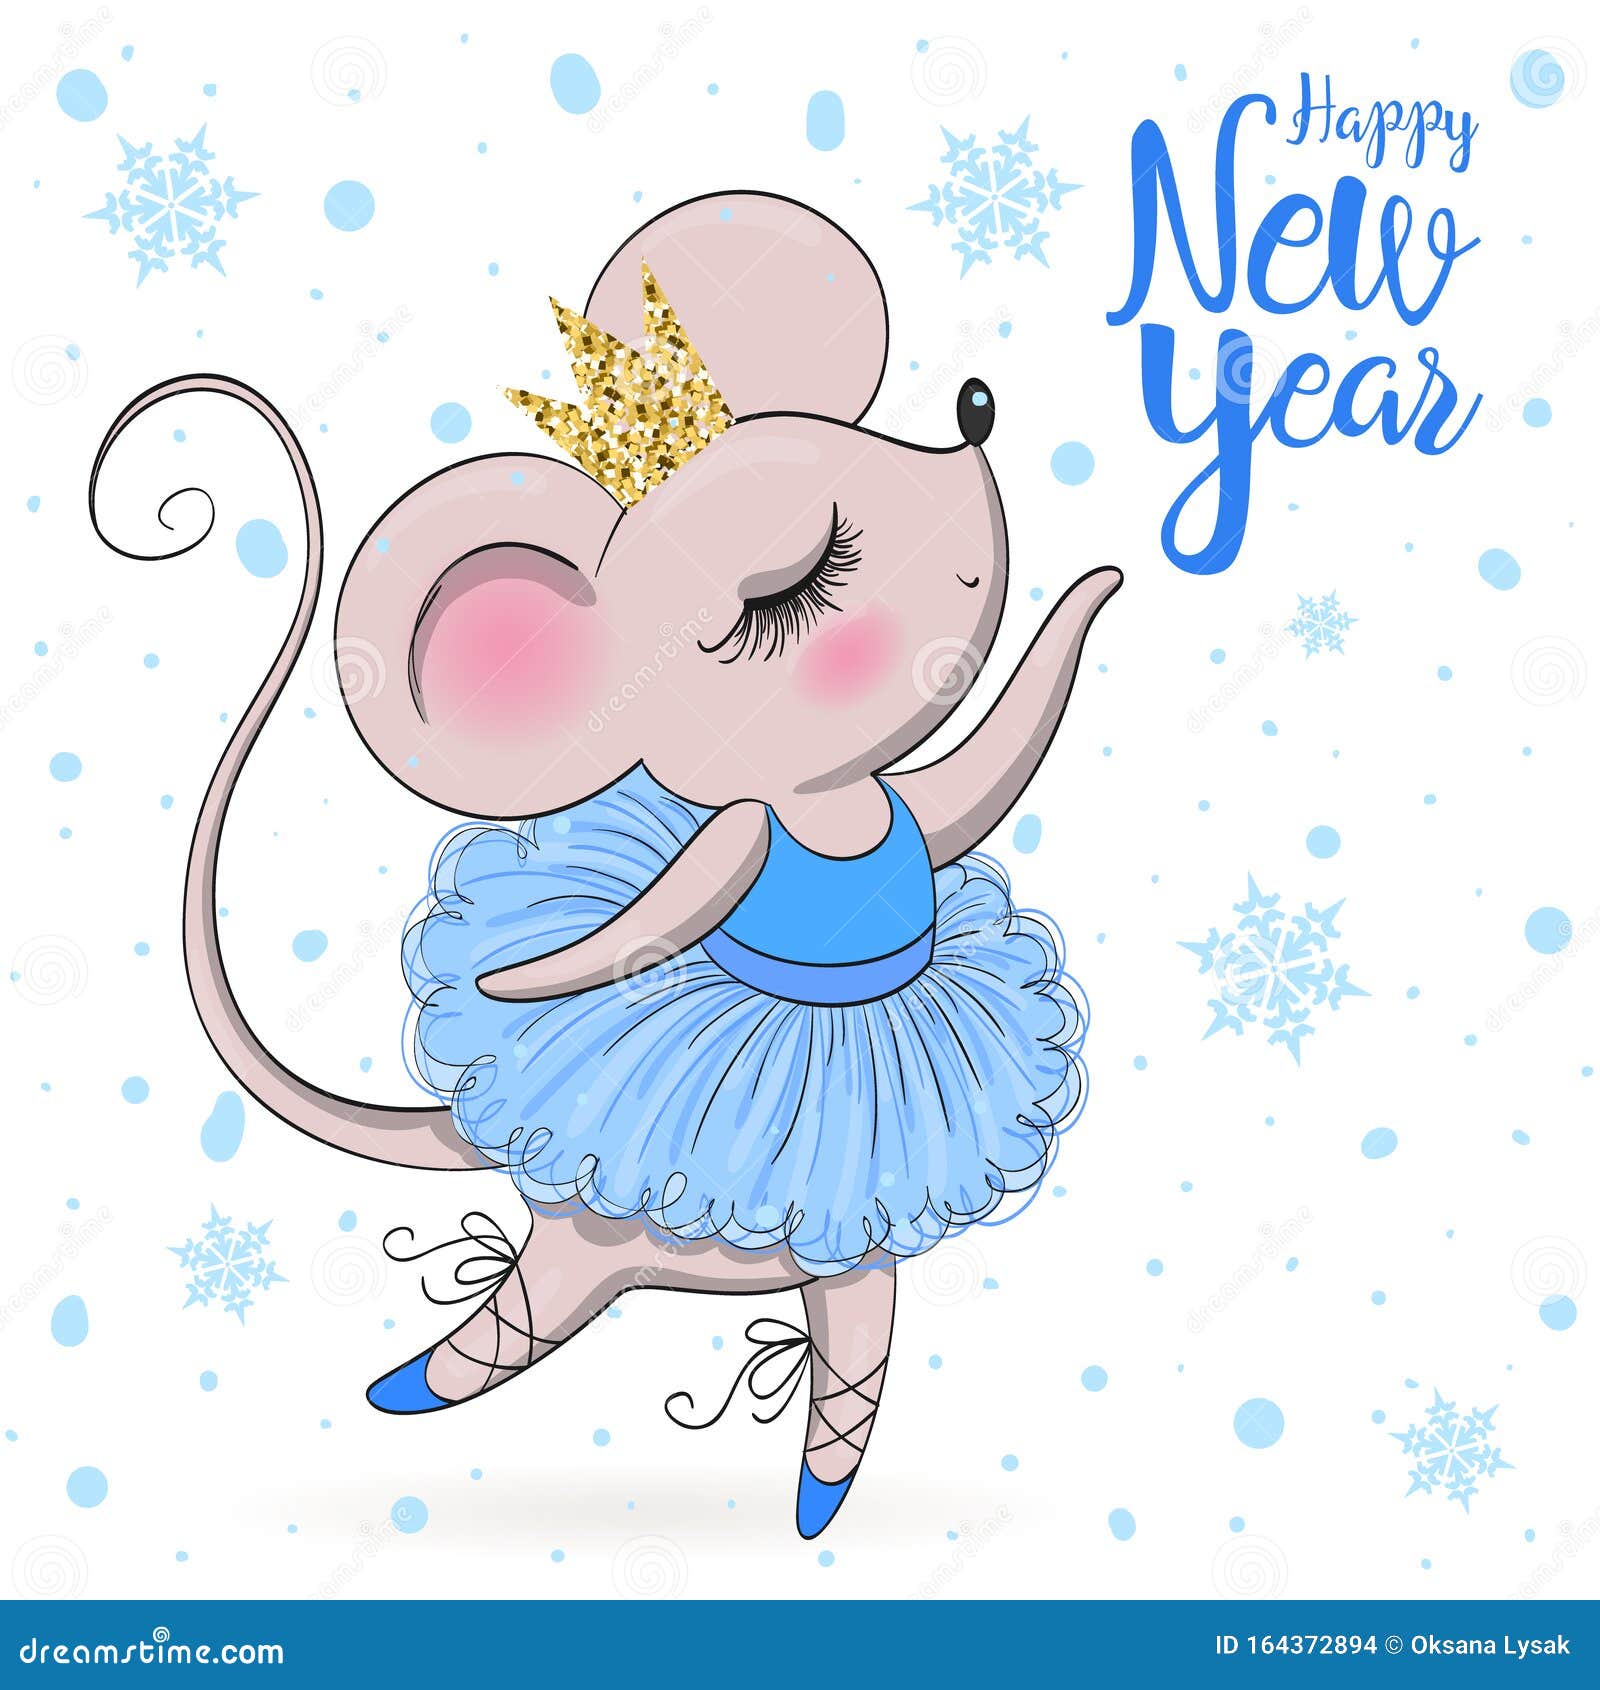 Hand Drawn Beautiful Cute Little Winter Fairy Girl with a Present and the  Words Happy New Year. Stock Vector - Illustration of cartoon, dress:  164372894